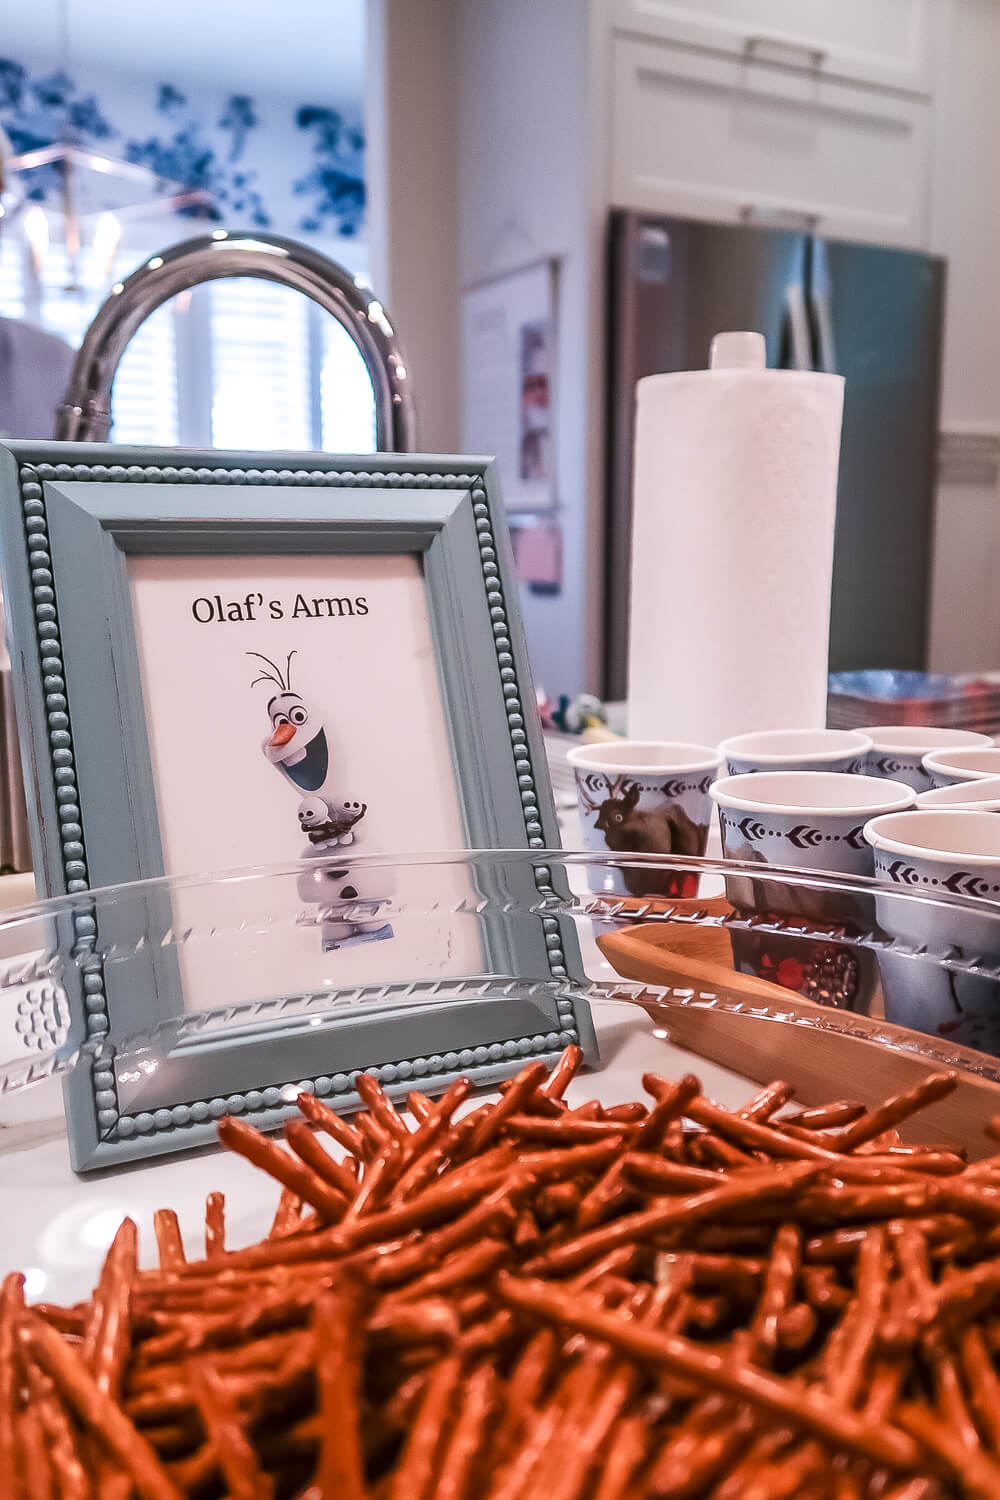 olaf's arms in front of pretzel rods